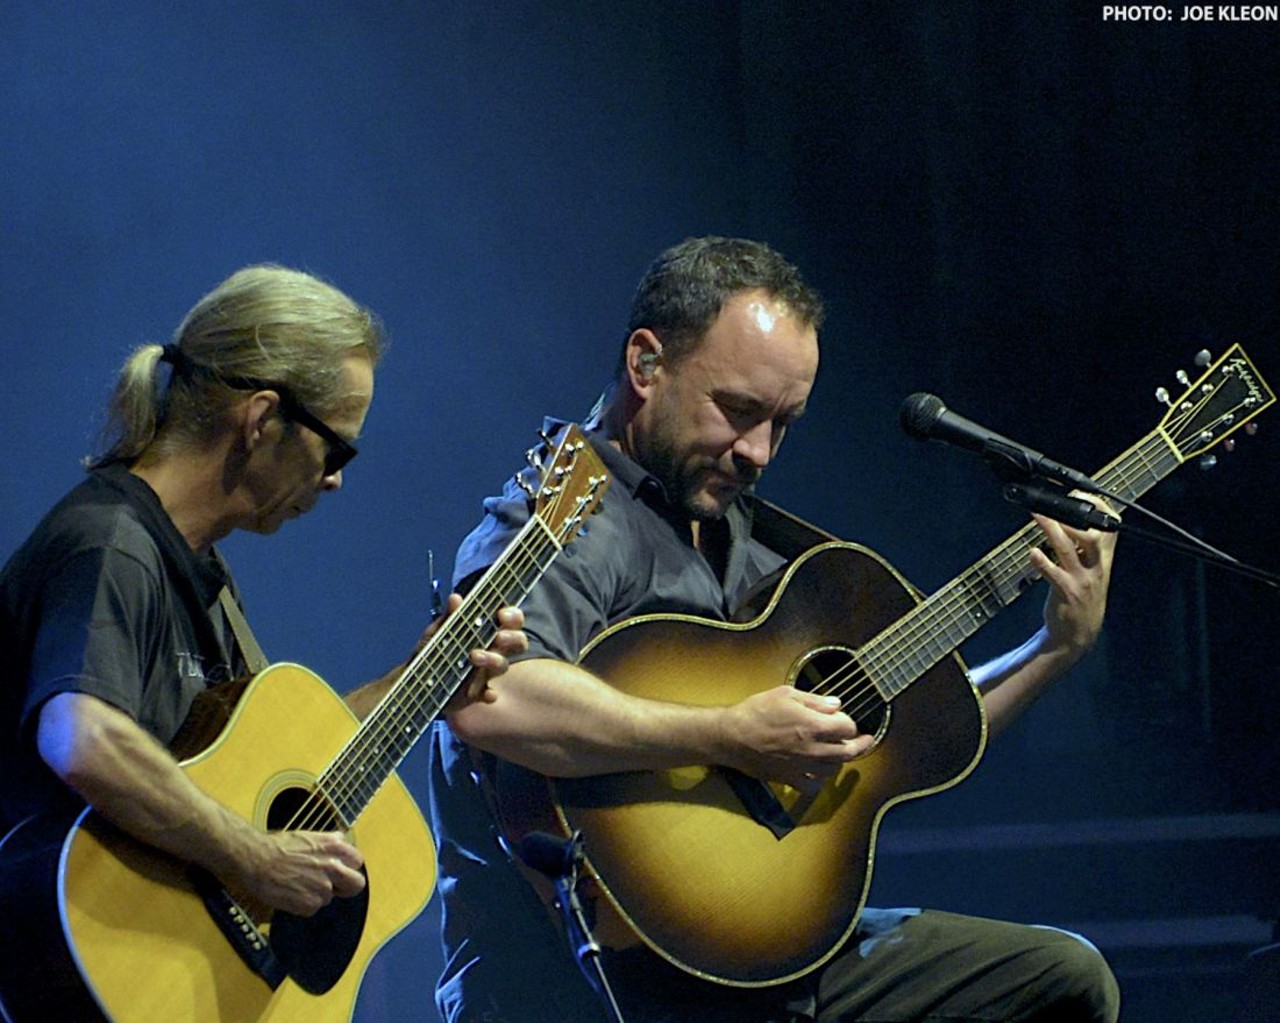 Dave Matthews and Tim Reynolds Performing at Blossom